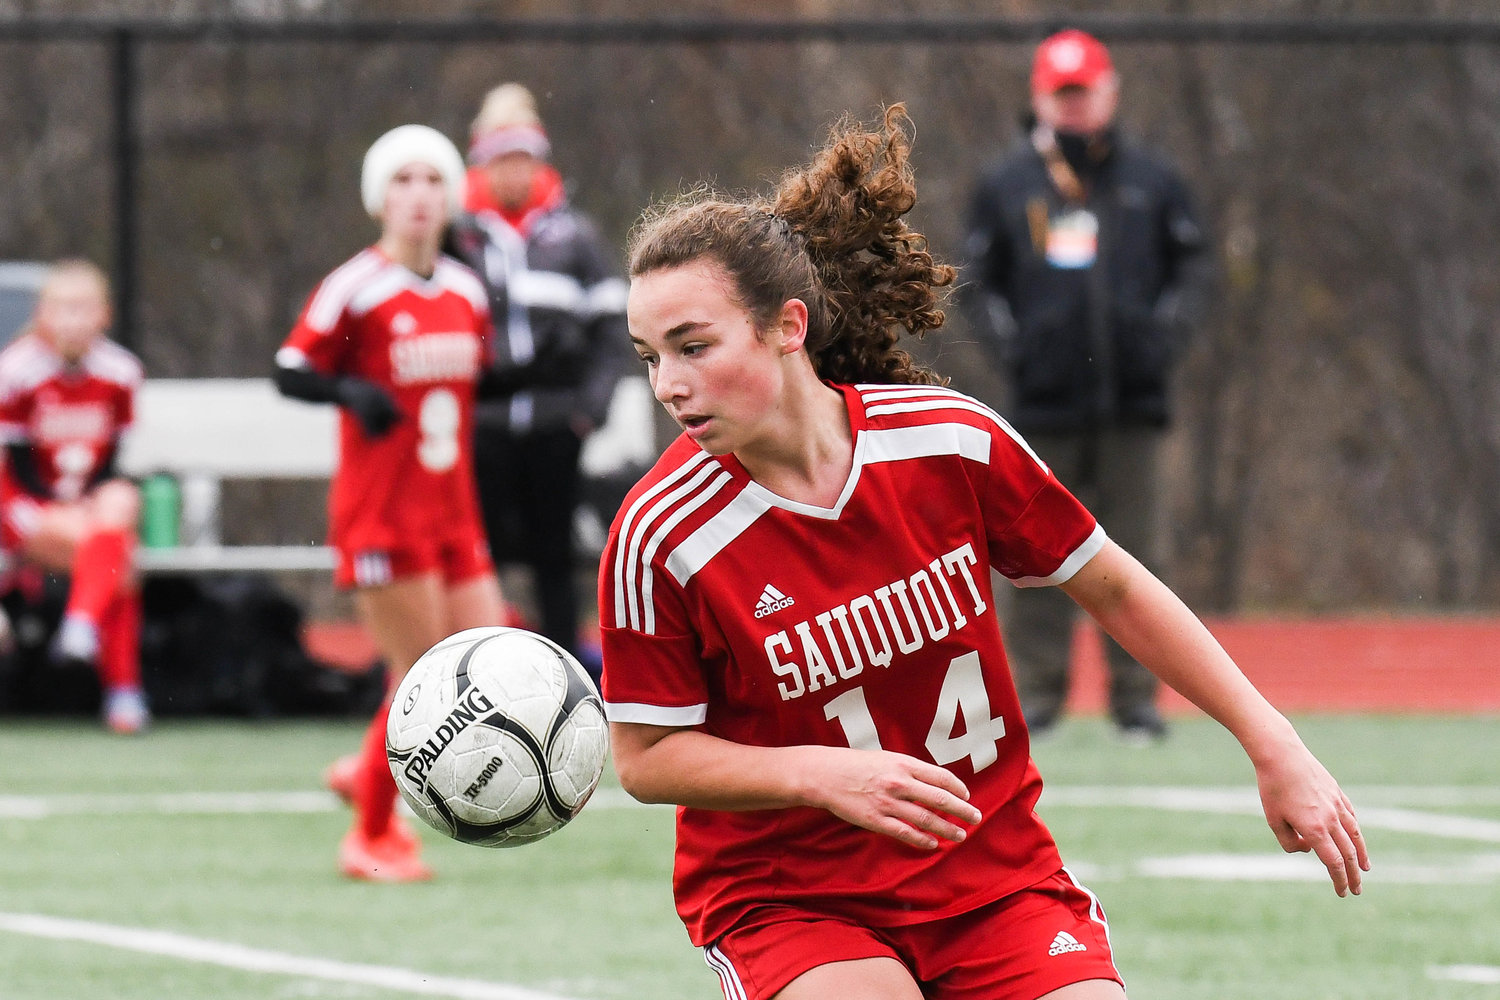 Sauquoit Valley's Ella Dischiavo goes after the ball during the Class C state final against Waterford-Halfmoon on Sunday at Cortland High School. Sauquoit lost 6-3.